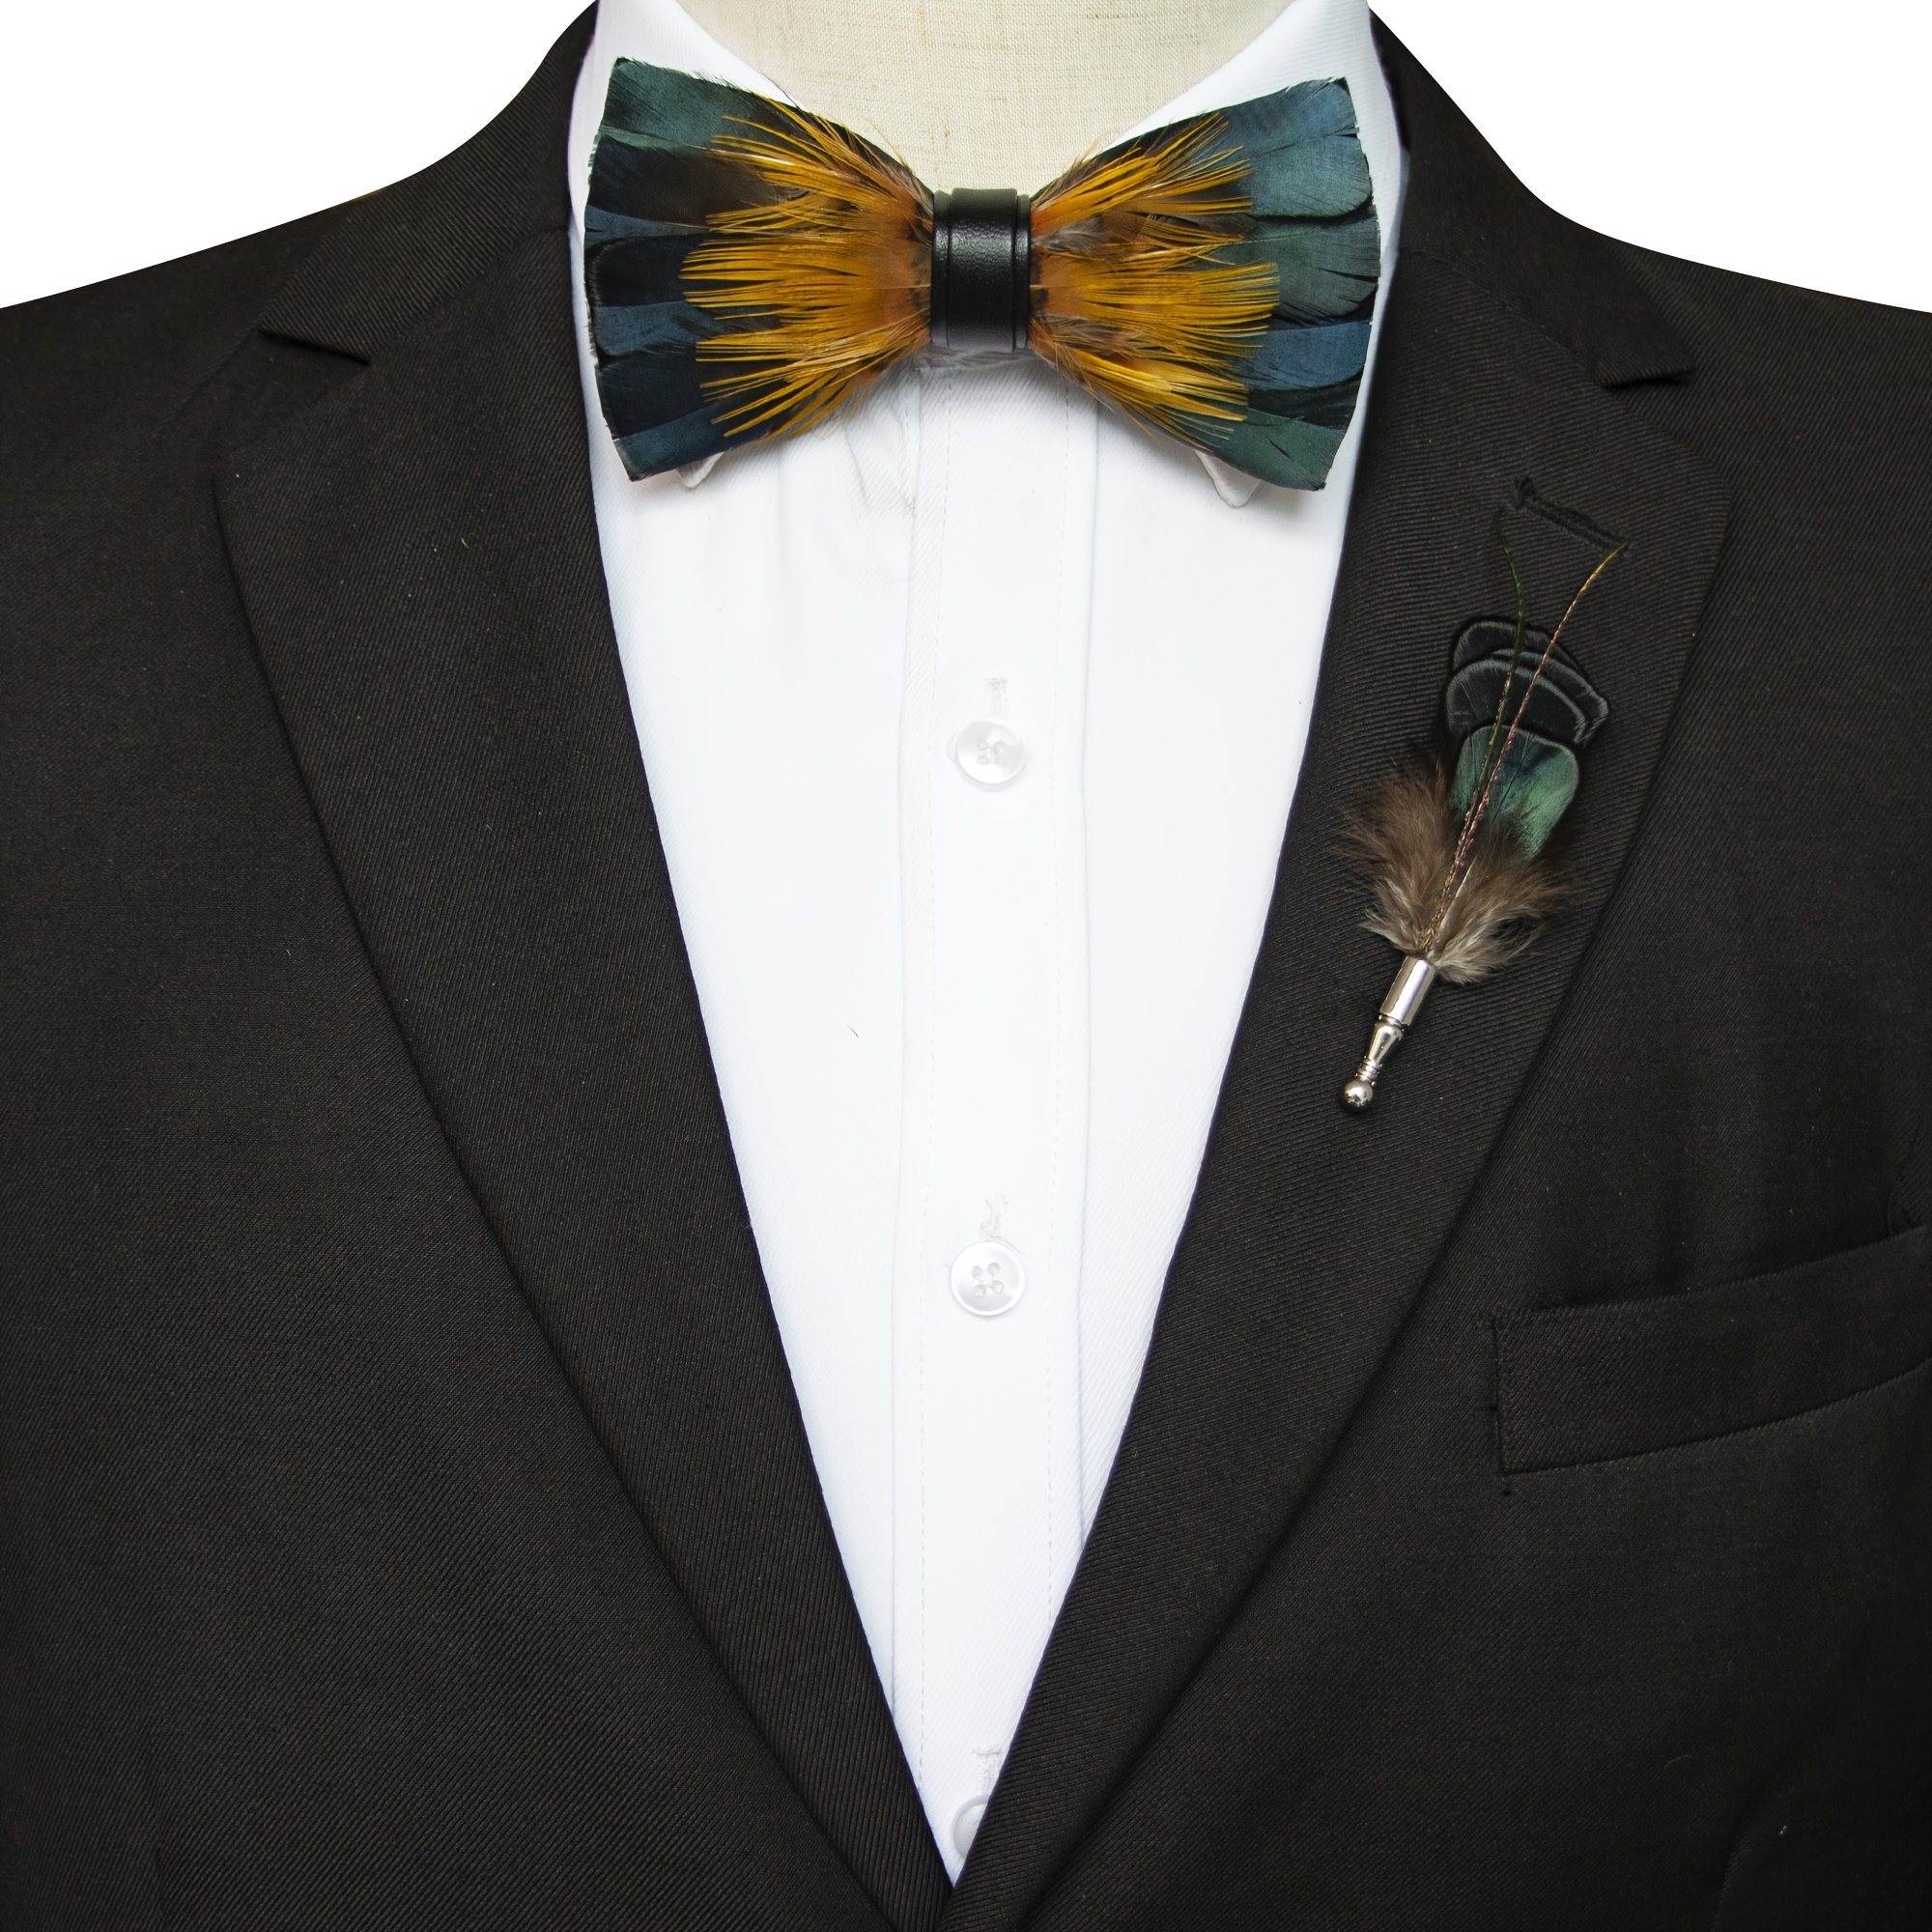 Philadelphia Feather Bow Tie with Feather Lapel Pin Set - Mandujour  Handmade  Free Feather Lapel Pin Gift Set for Prom and Formal Occasions -  Classic and Timeless - Mandujour